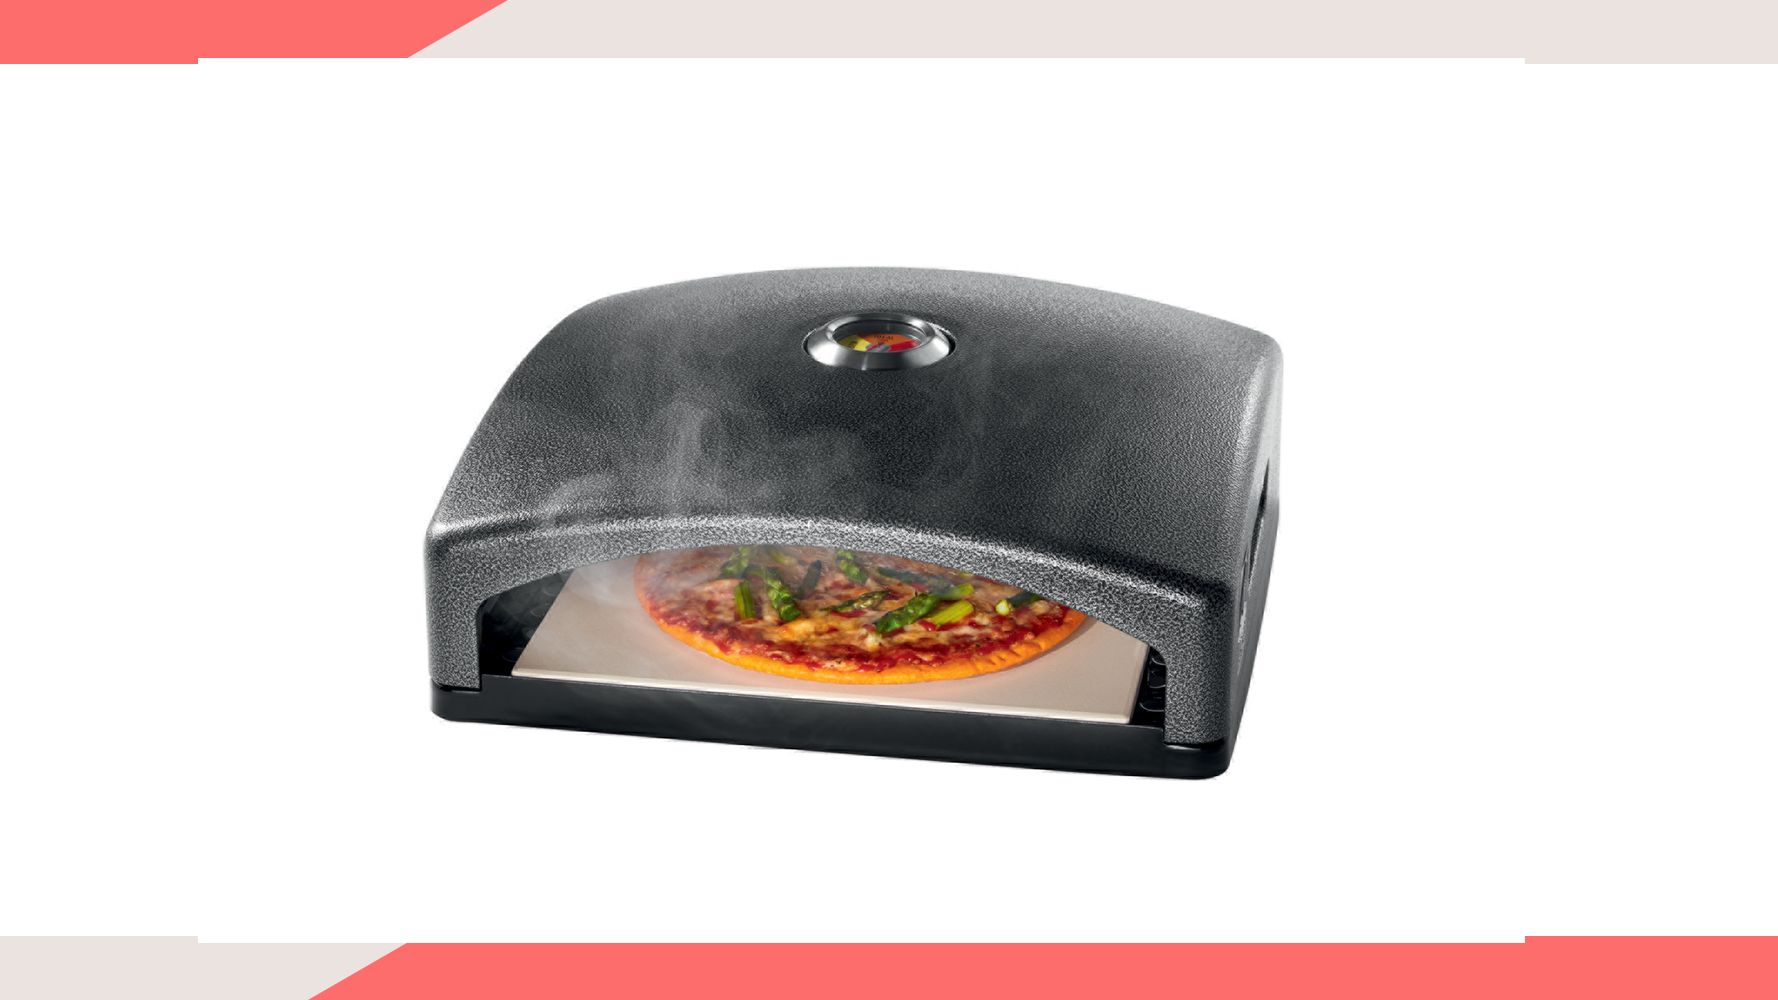 jeans wacht Pessimist Lidl is selling a BBQ pizza oven for under £40